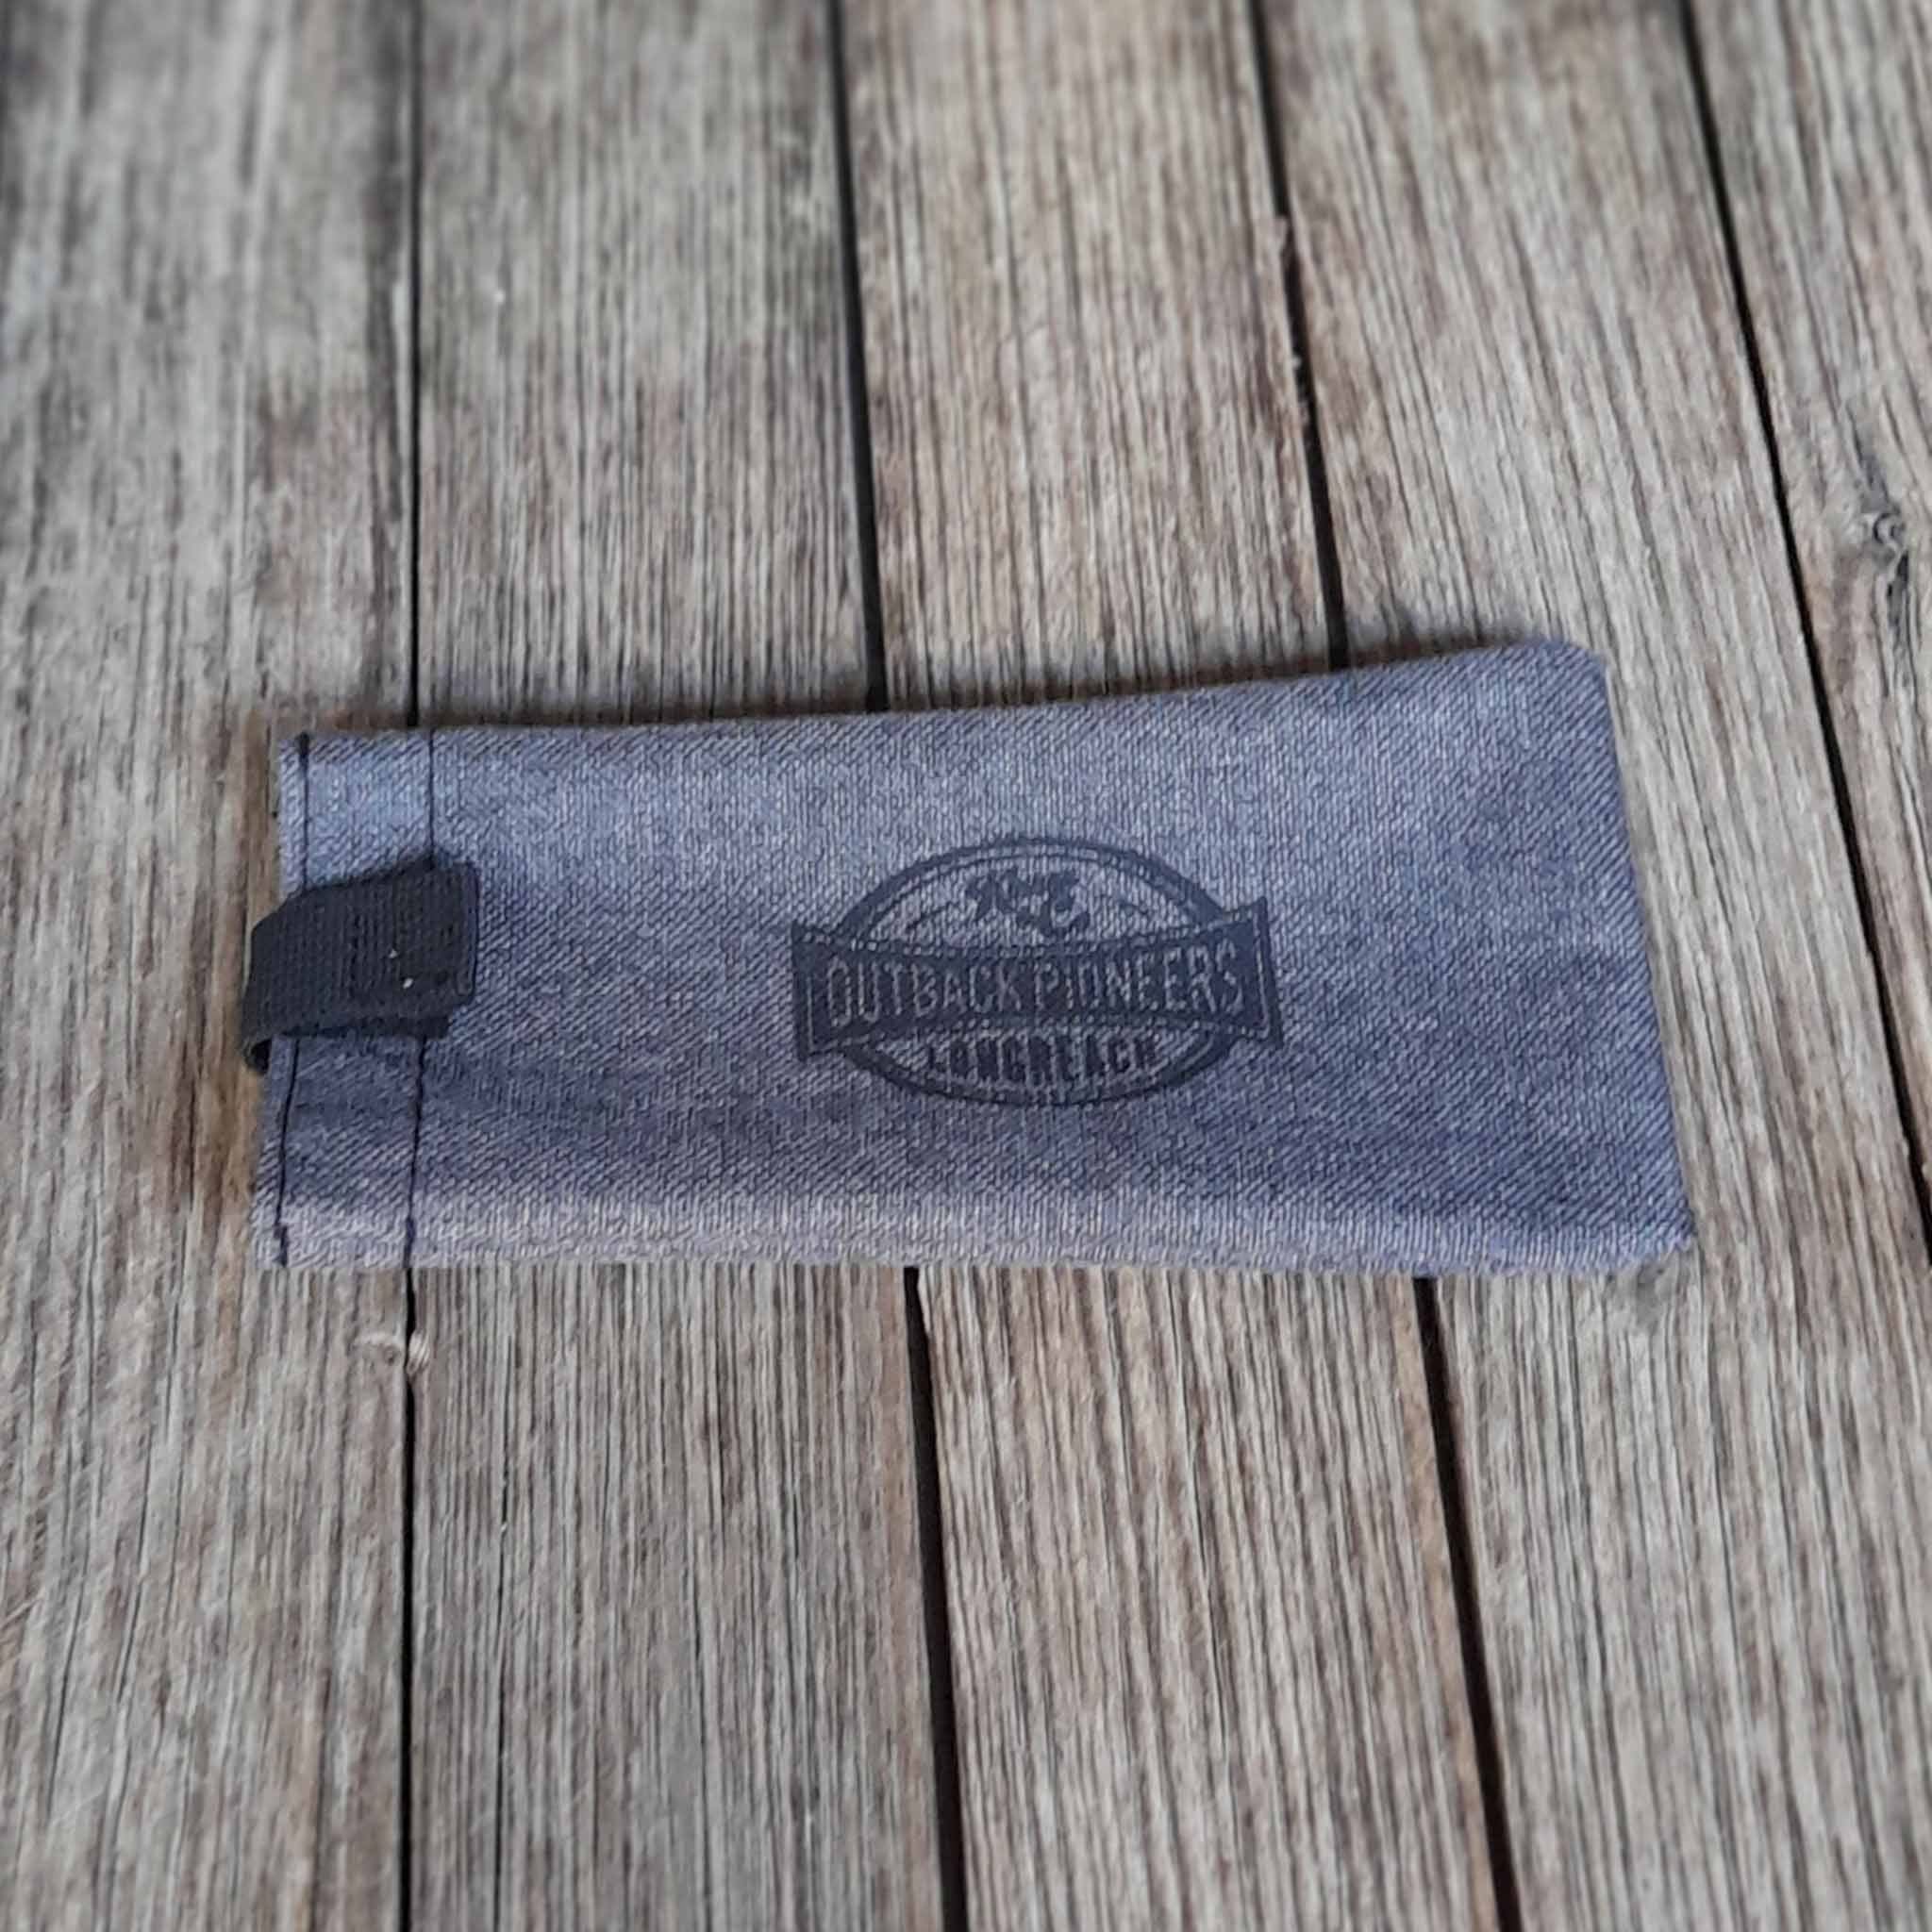 Outback Pioneers Sunglasses and eye glasses pouch with grey heathered finish. 